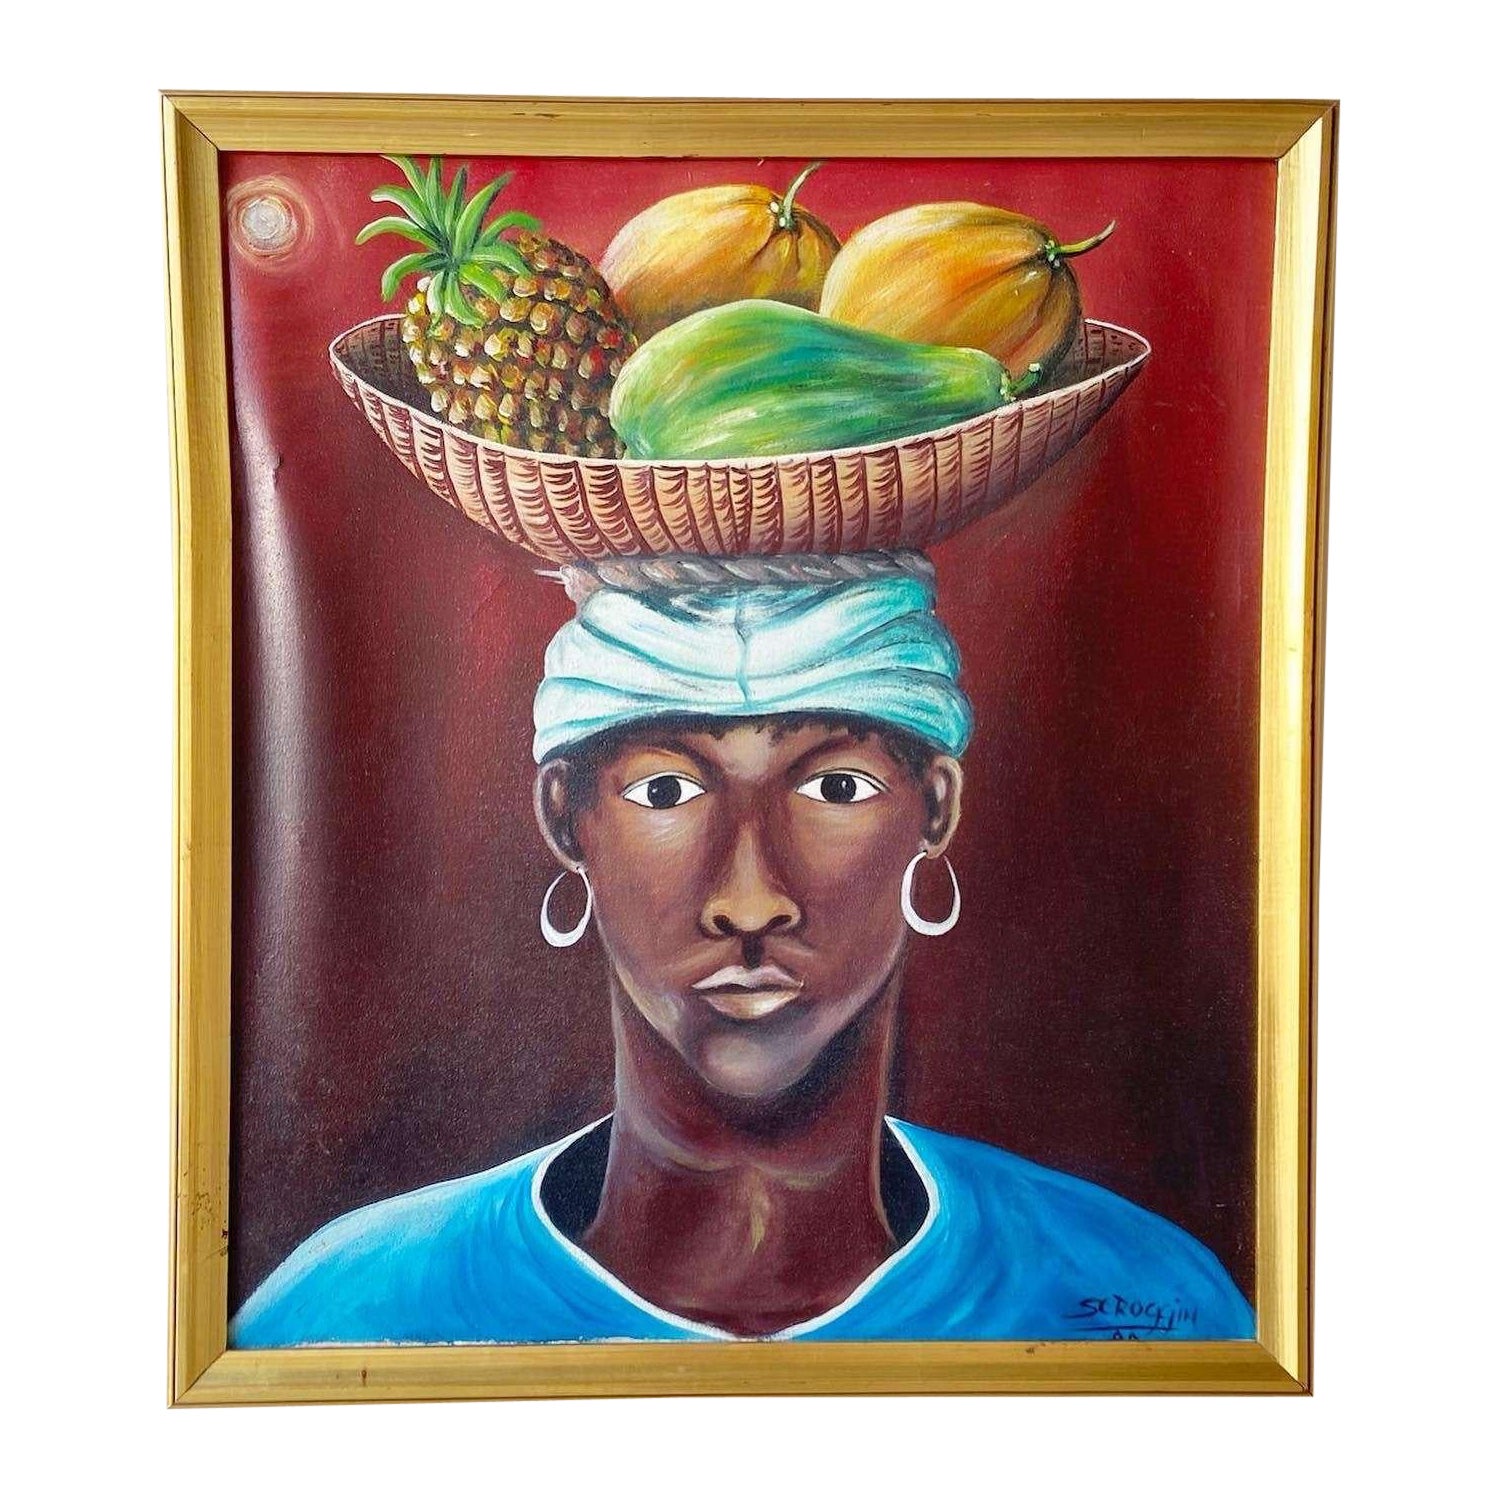 Original Framed Oil Painting of Caribbean Woman With Fruit Bowl by Scroggin For Sale